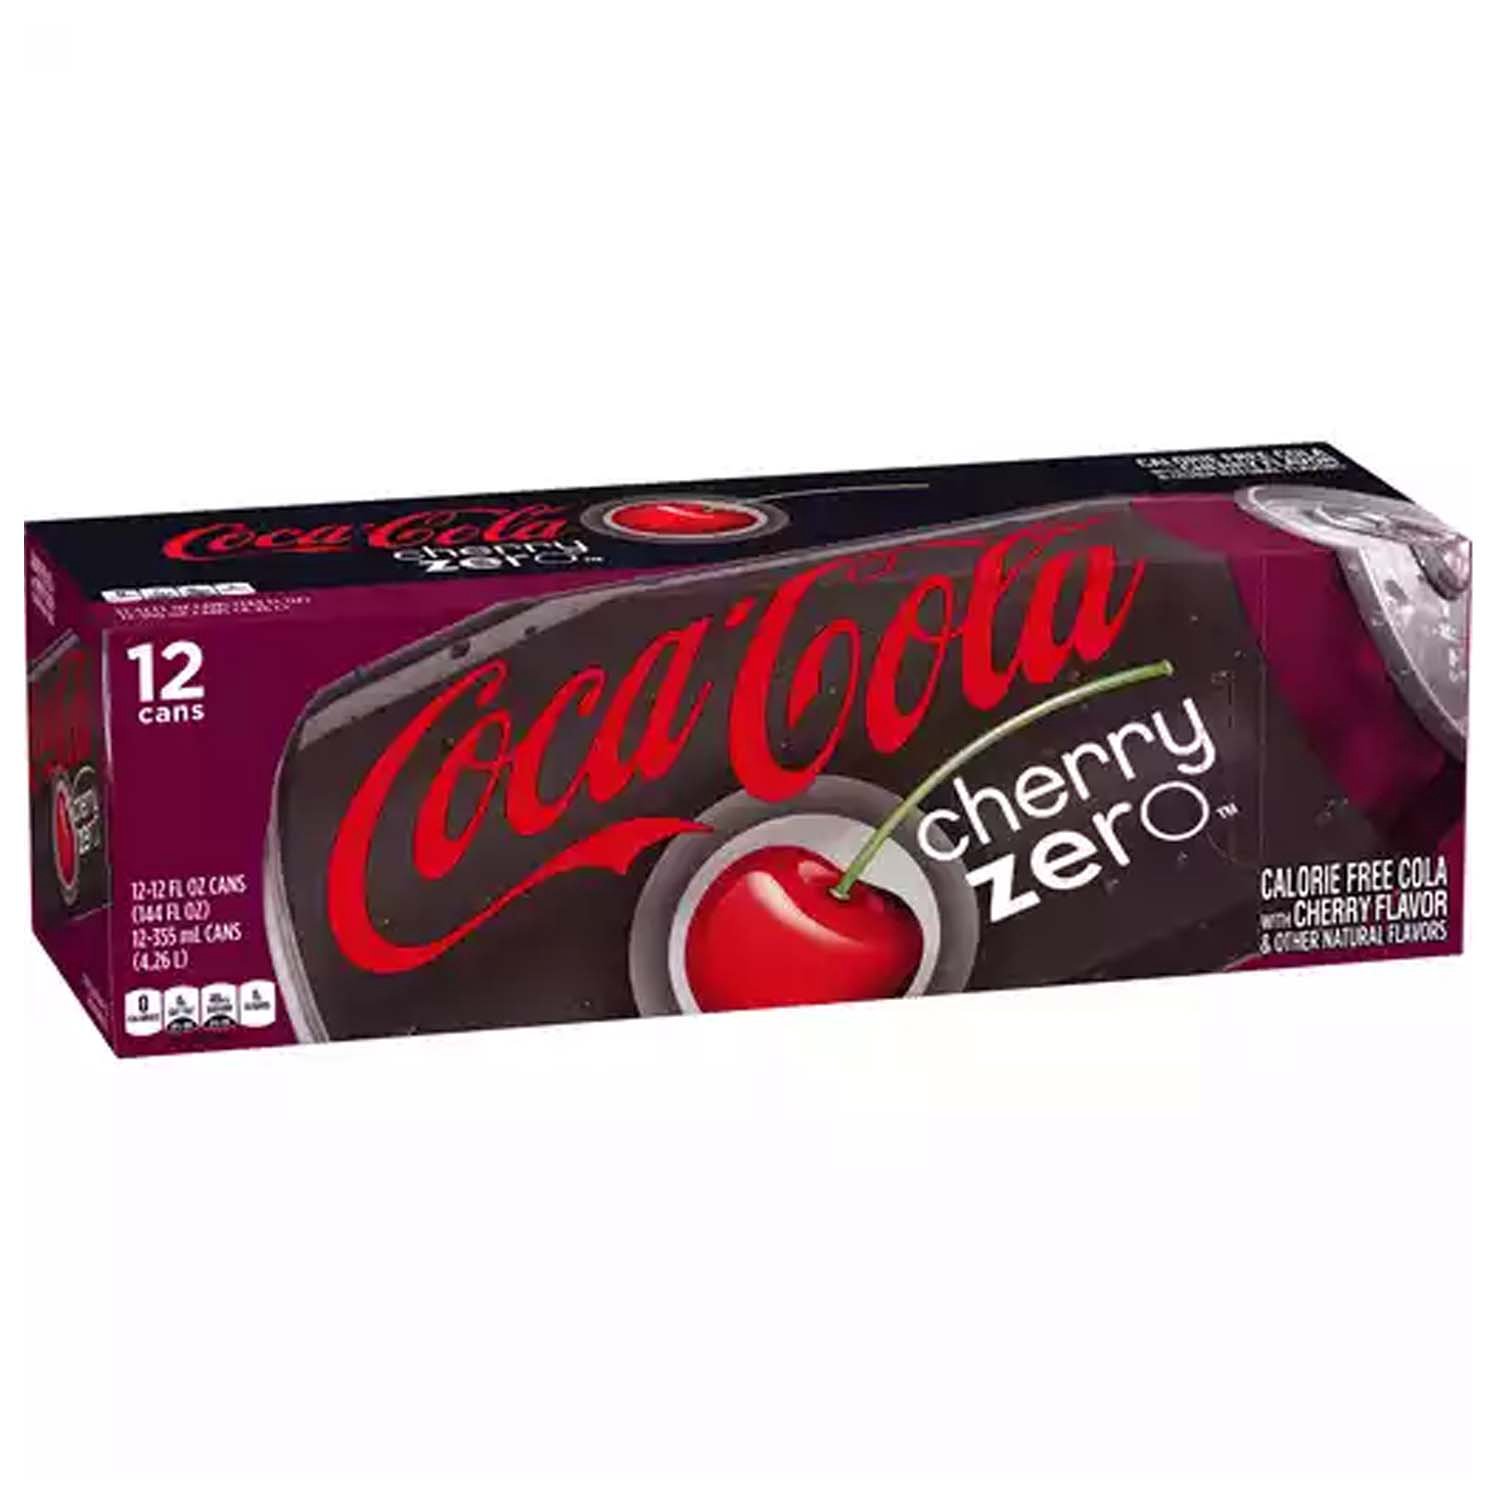 Cherry Coca-Cola, Cans (Pack of 12)